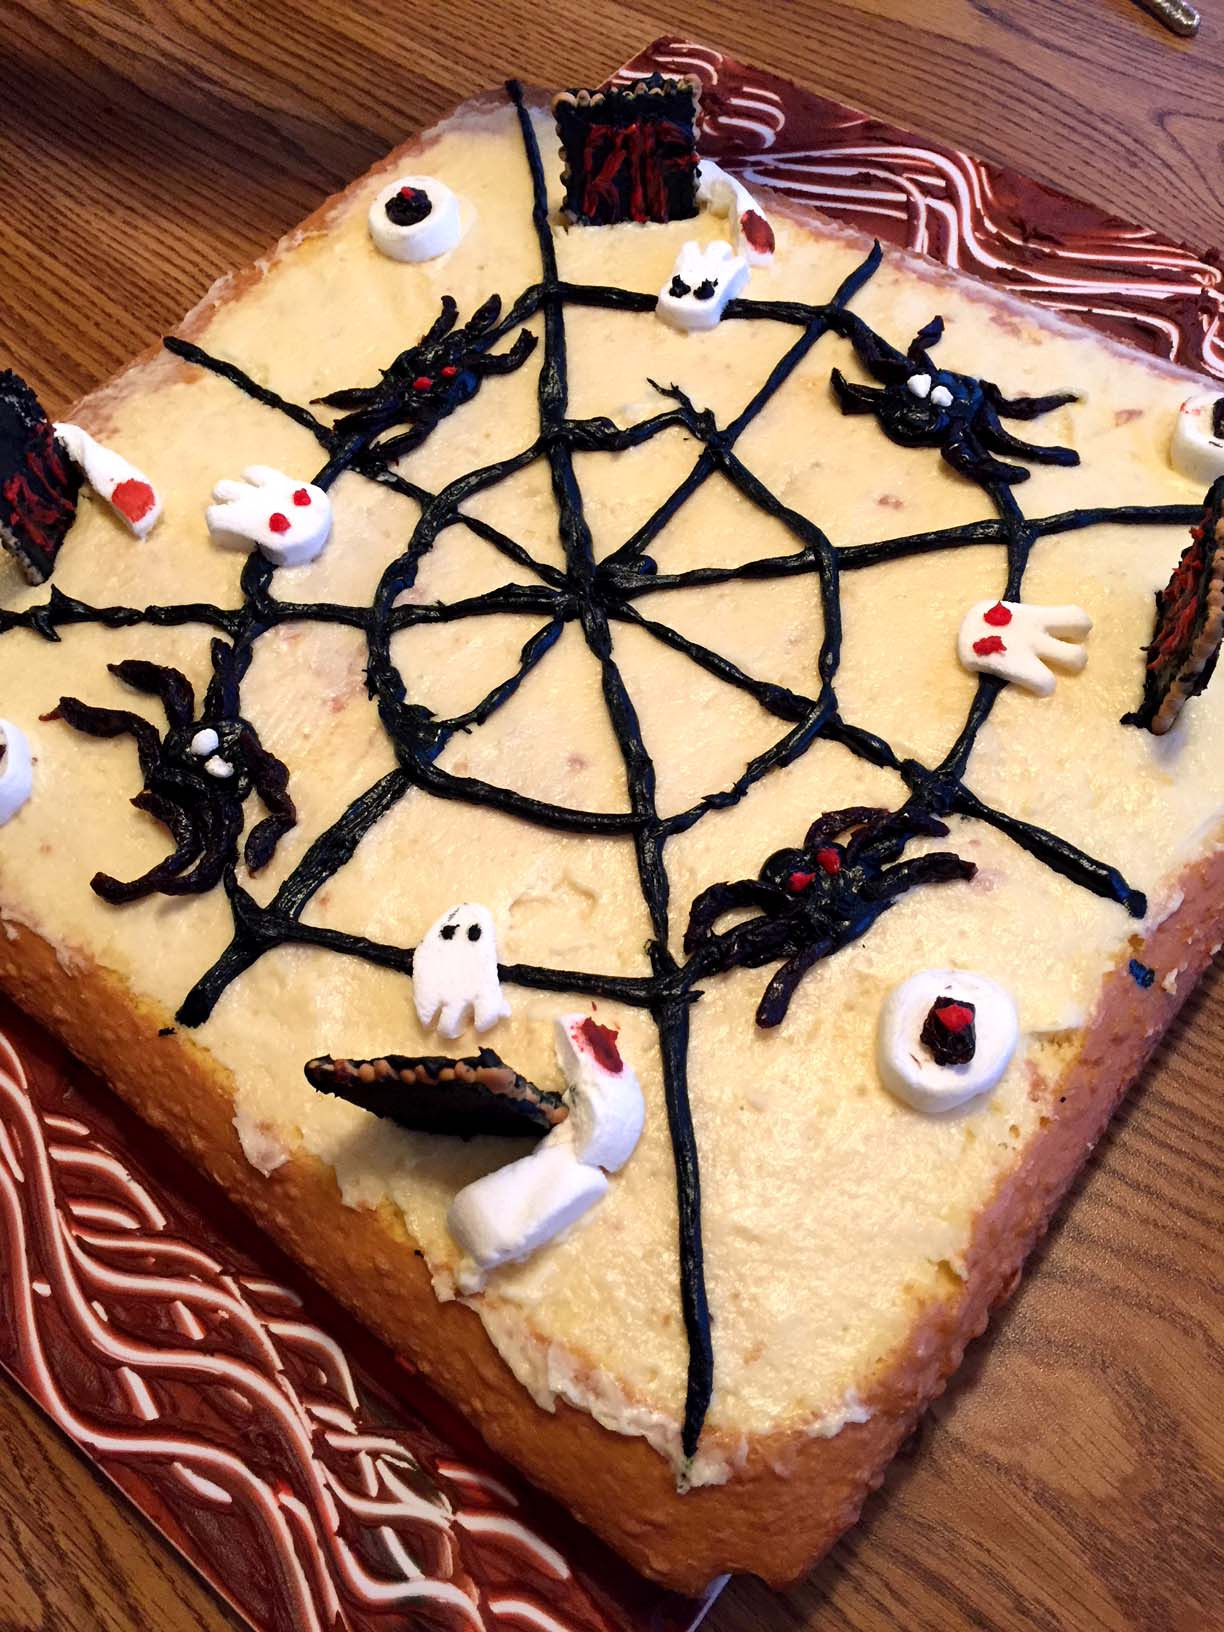 Halloween Decorating Cakes
 Easy Halloween Cake Decorating Ideas For Spooky Cake